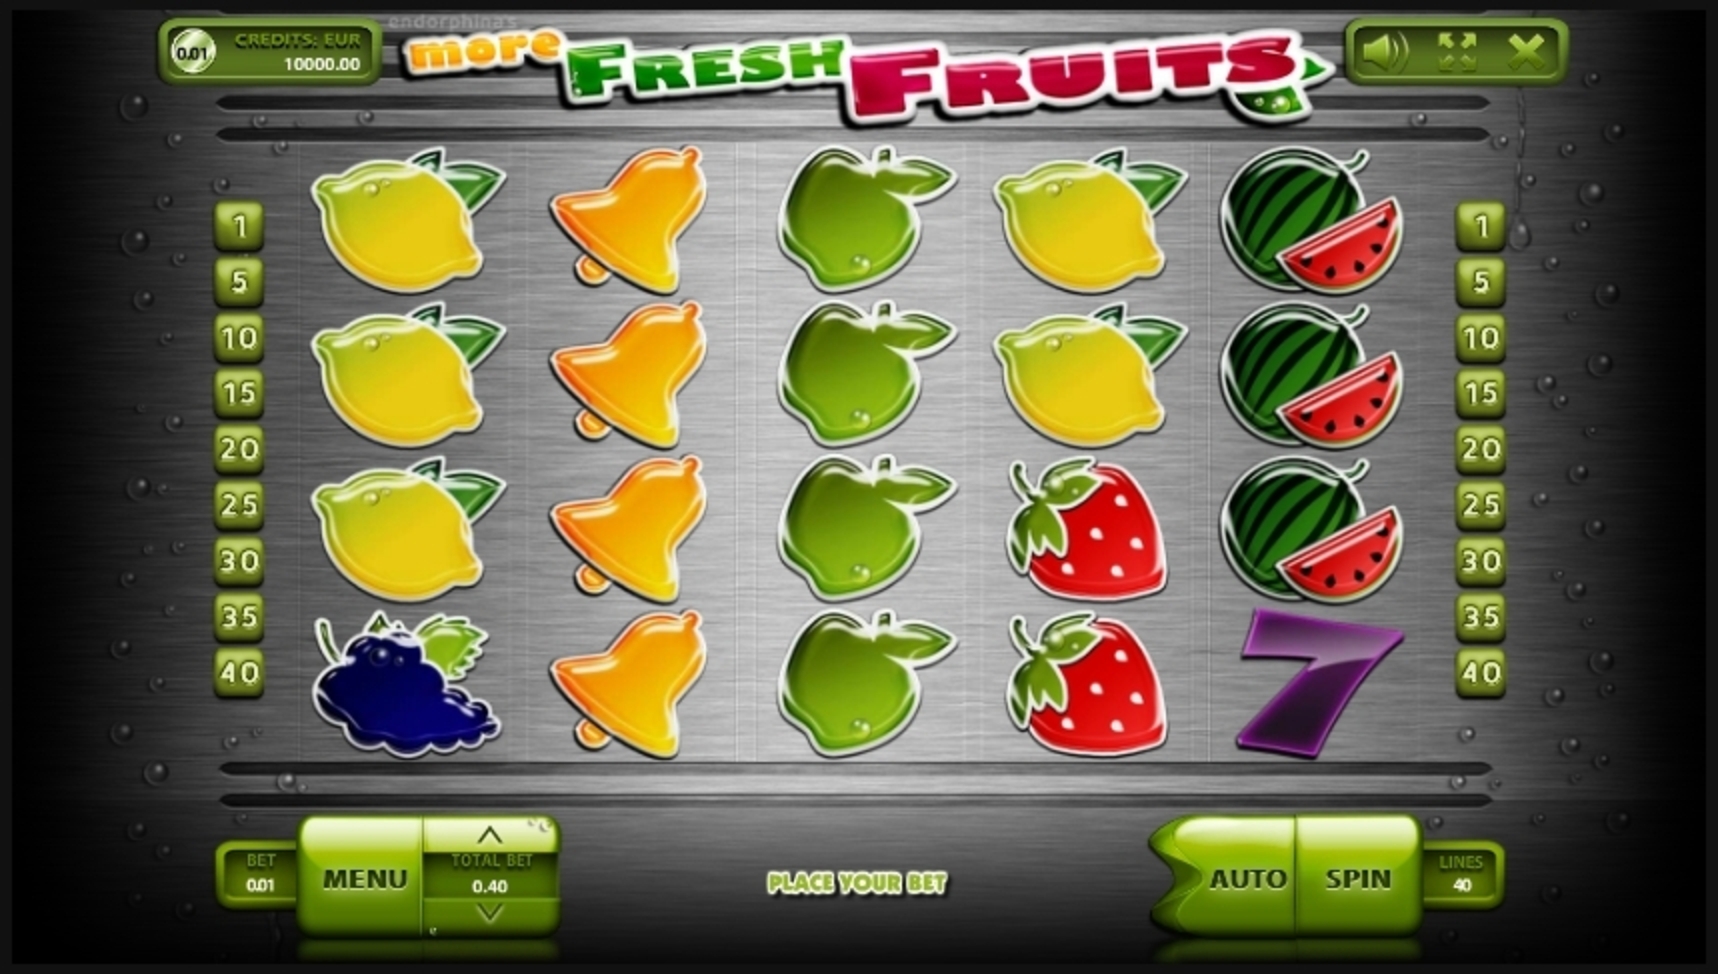 Reels in More Fresh Fruits Slot Game by Endorphina